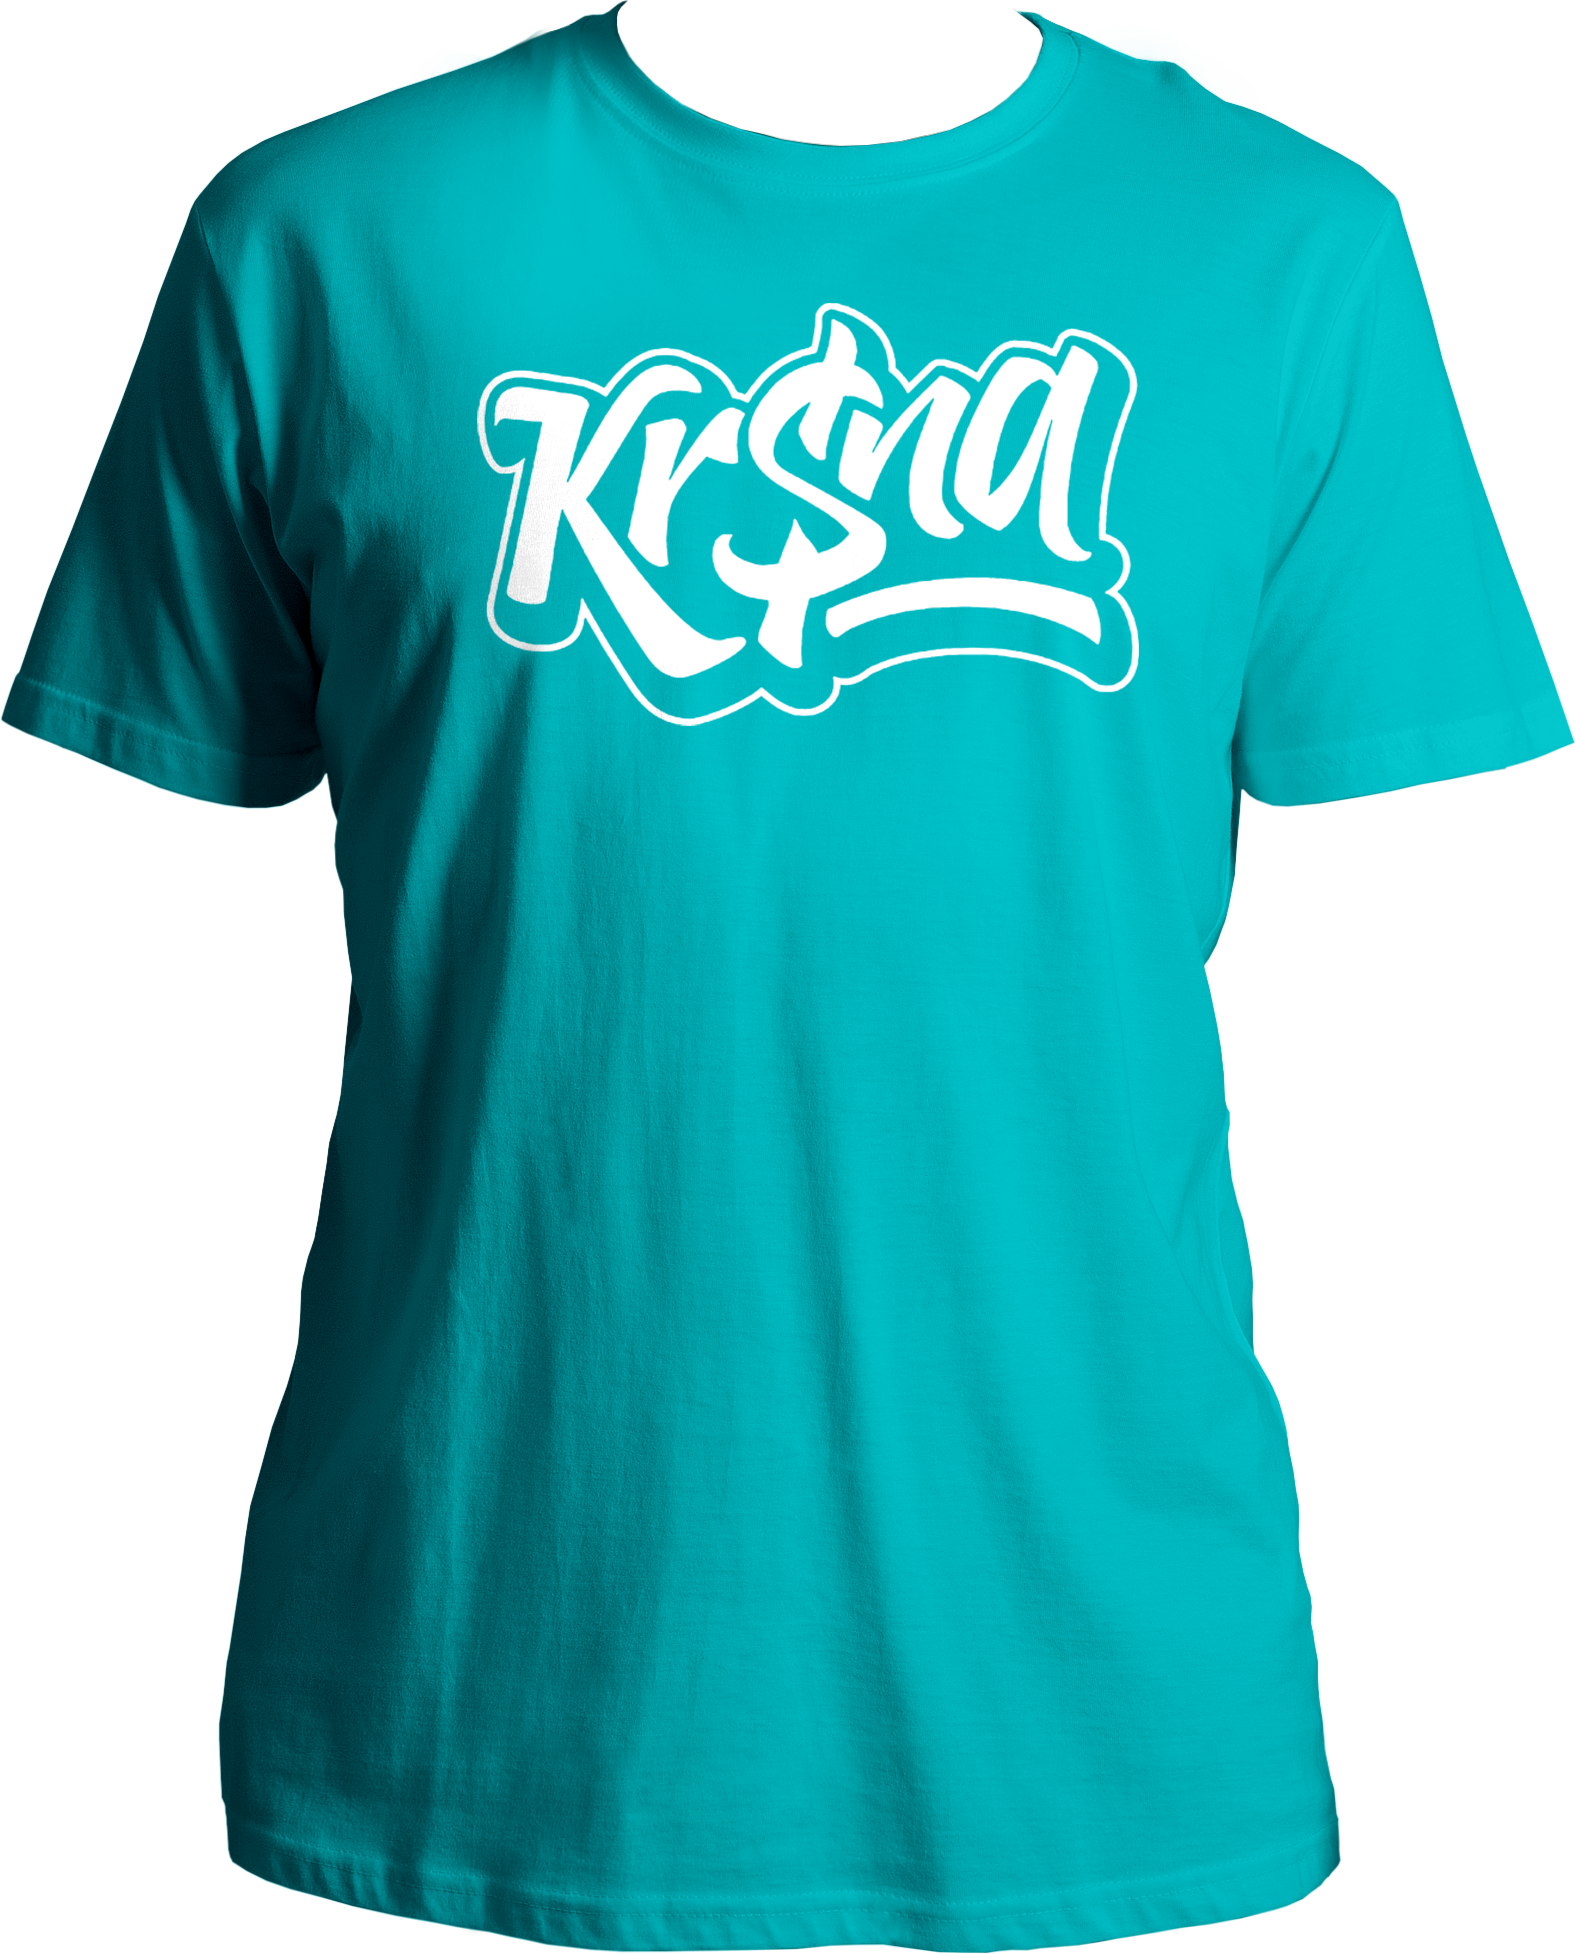 Attention all Krsna fans! Don't miss your chance to rock the same style as your favorite rapper. Our Krsna Unisex Cotton T-Shirt is the ultimate fashion statement for true aficionados. So why wait? Get yours today and show the world where your allegiance lies – with the one and only Krsna!